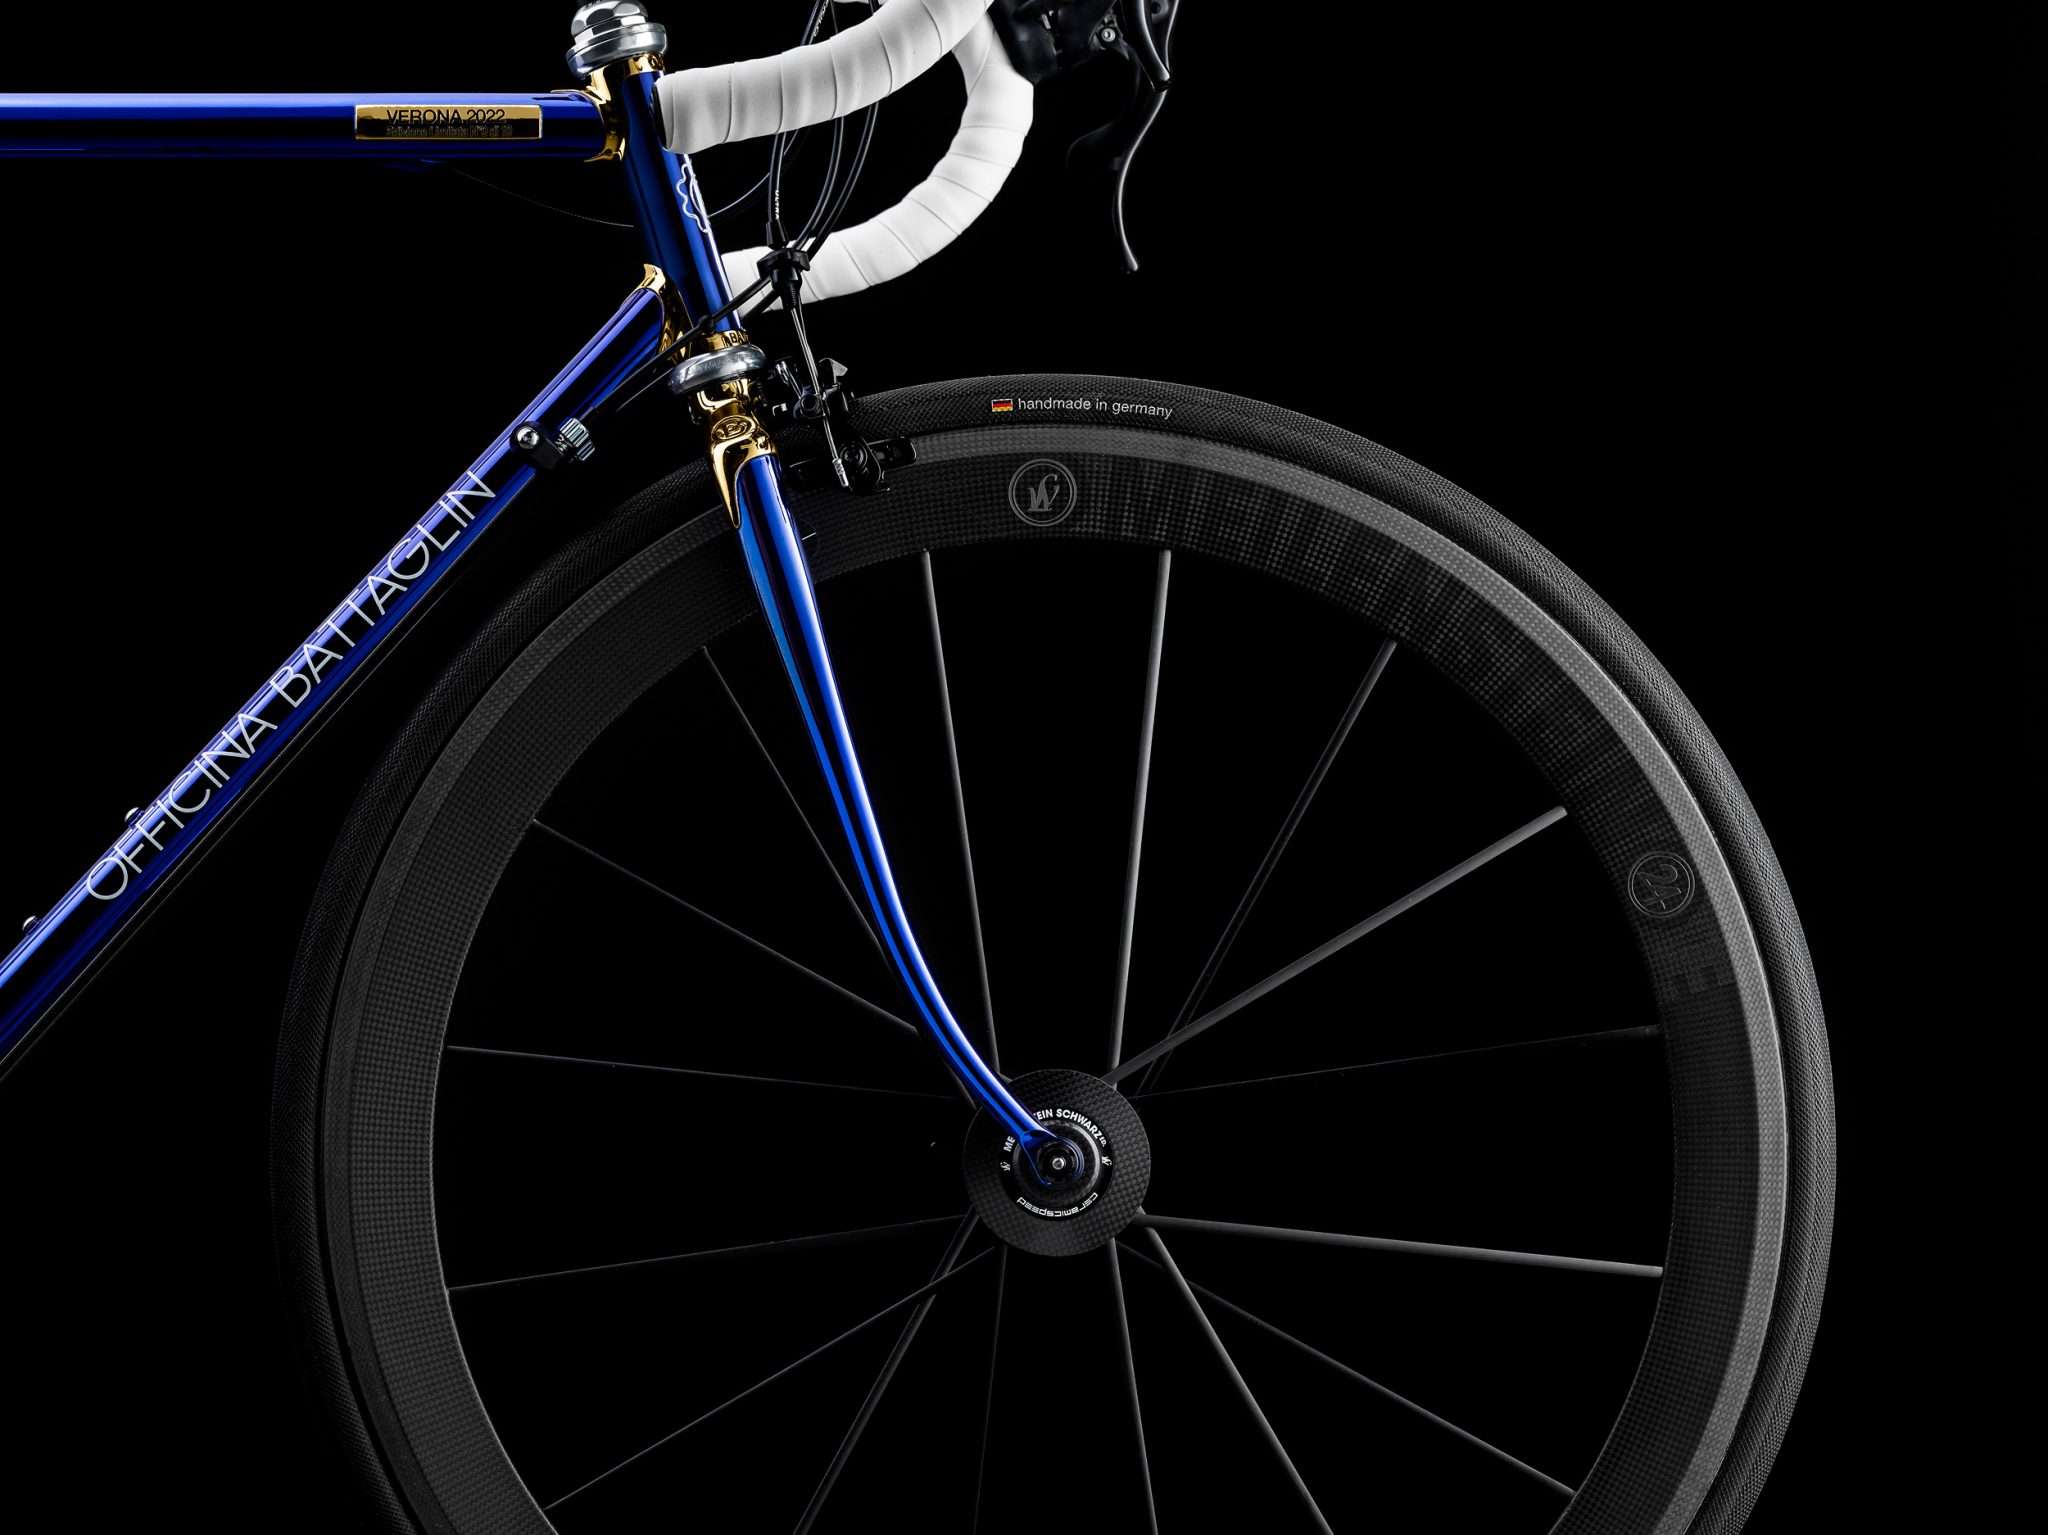 The Limited Edition Battaglin Verona 2022 will include distinctive gold plated lugs and stays